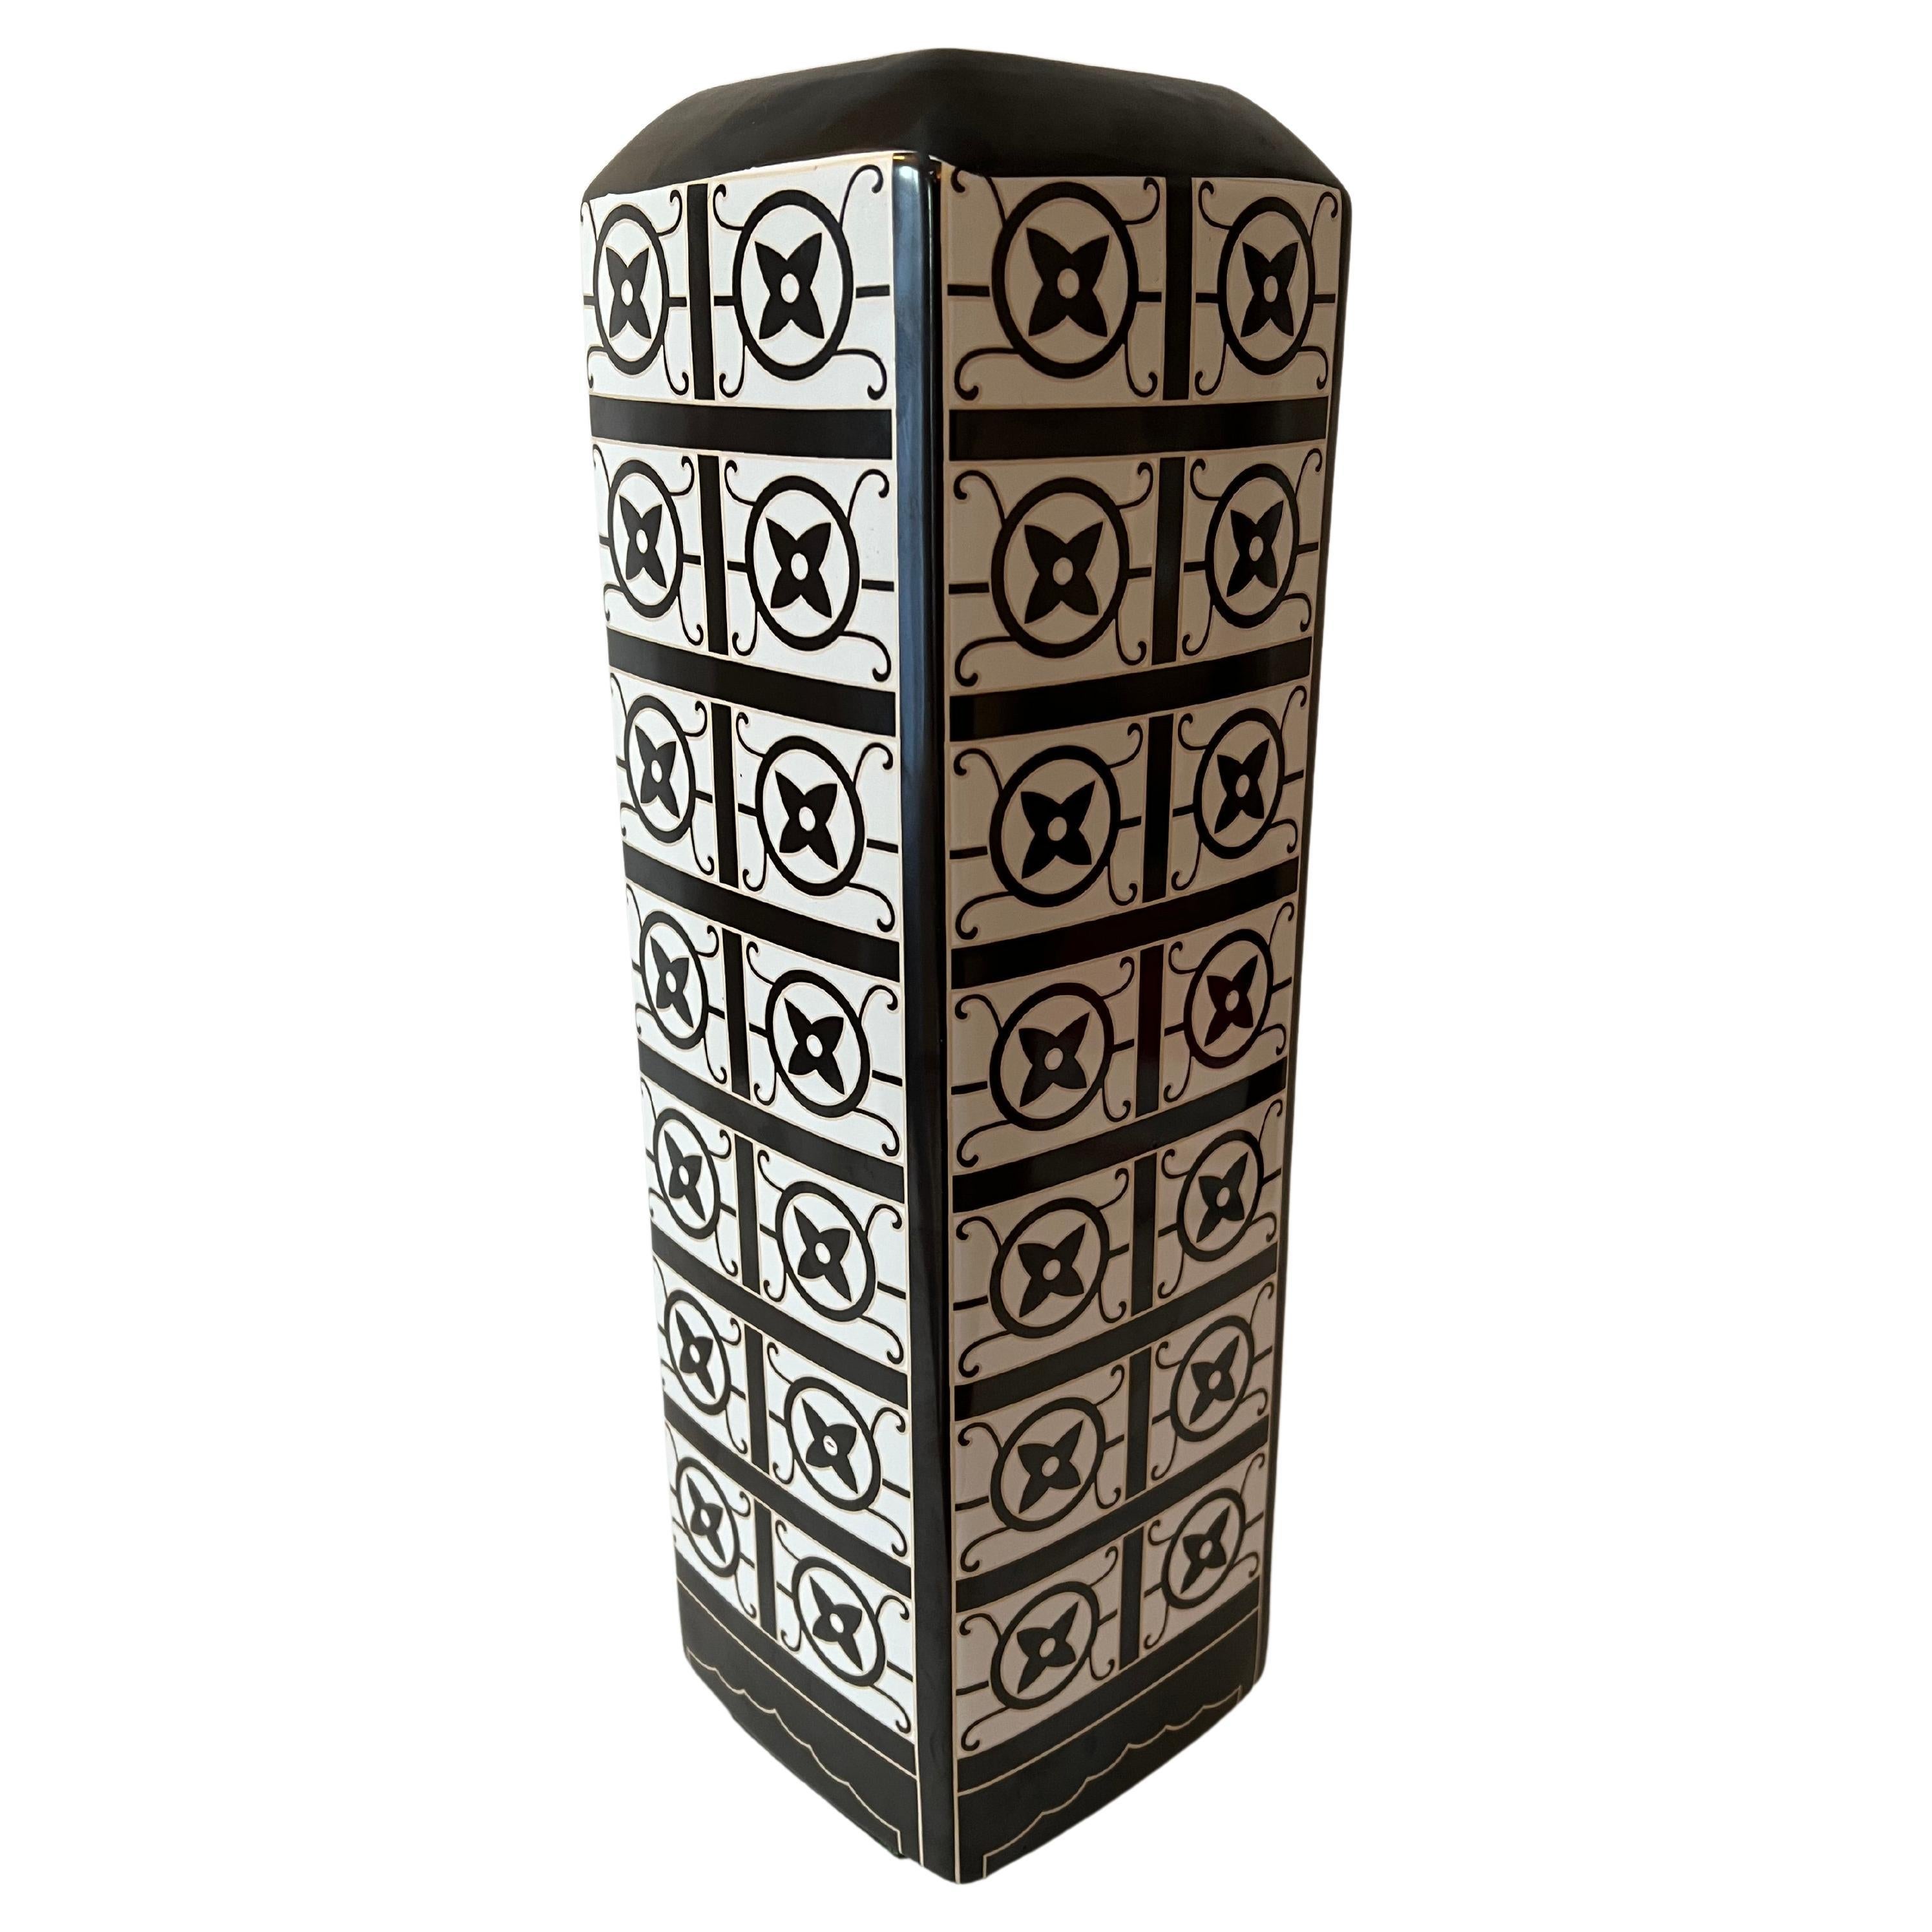 A porcelain vase with black / white and gold designs of the Louis Vuitton Logo with Flower pattern. With a size and width that work well for height on a console, desk or cocktail table. 

The height with a bouquet of flowers makes a very nice